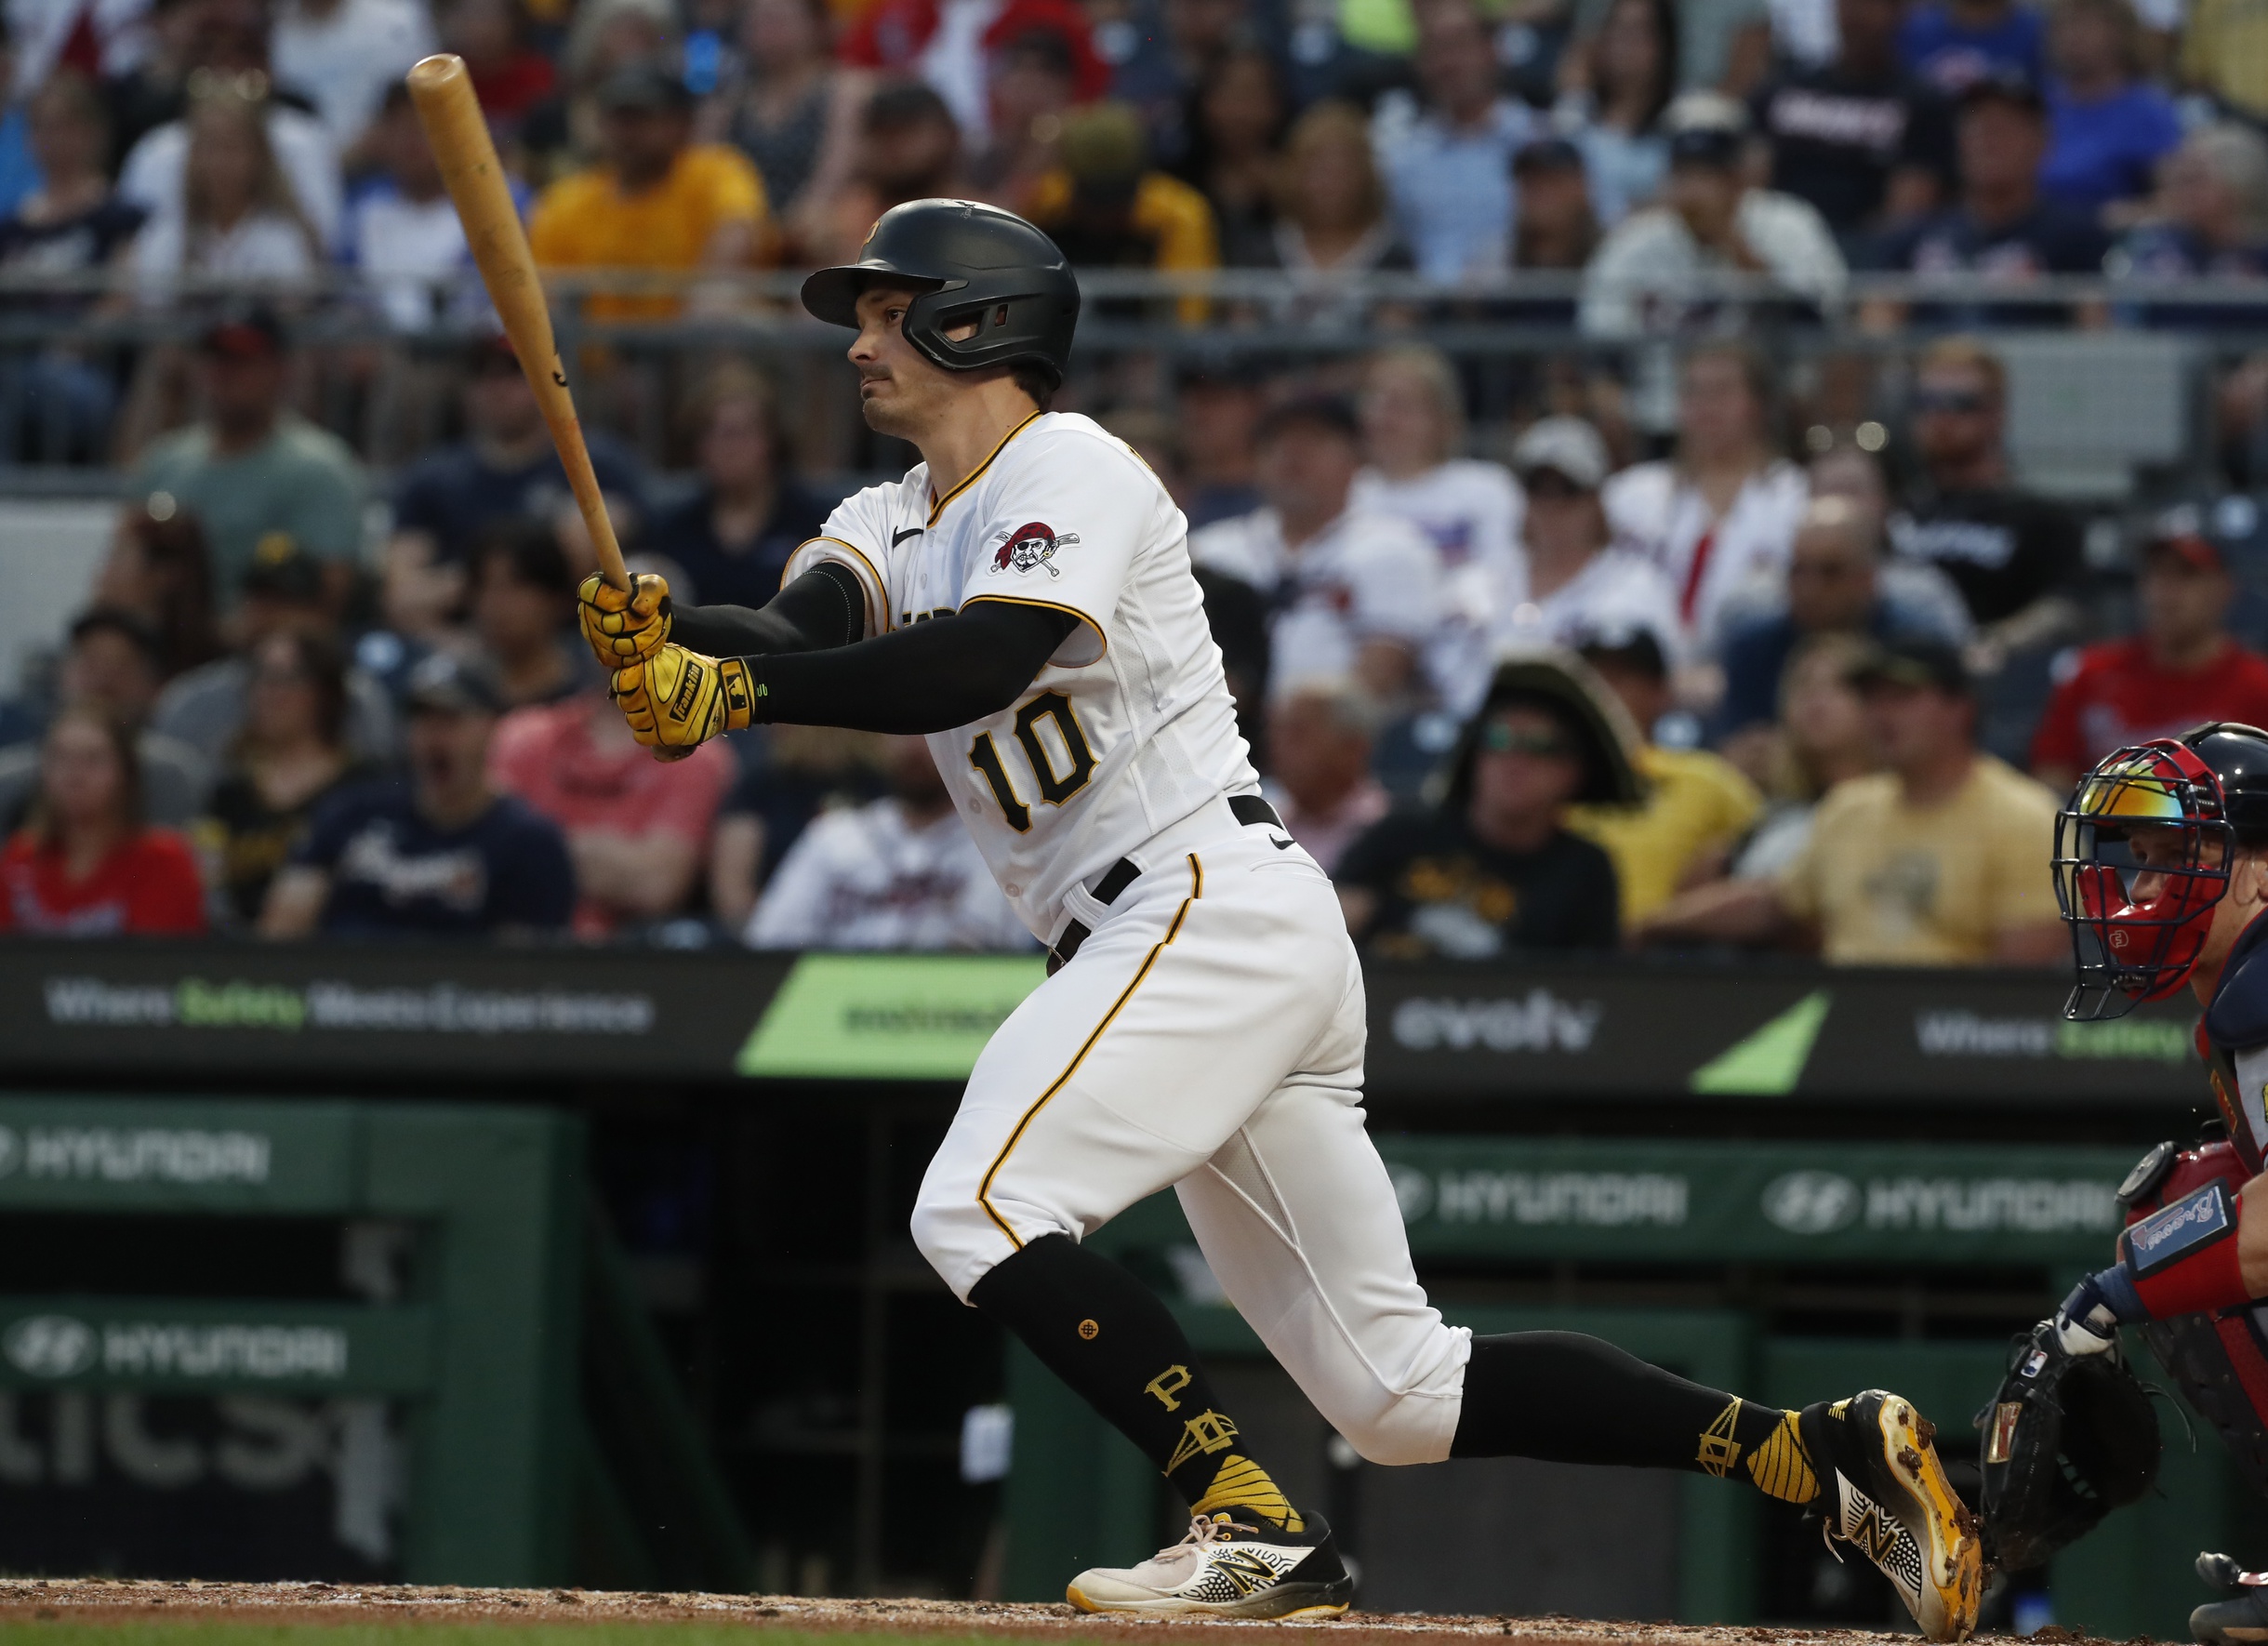 What's new with the Washington Nationals, the Pirates' next opponent?